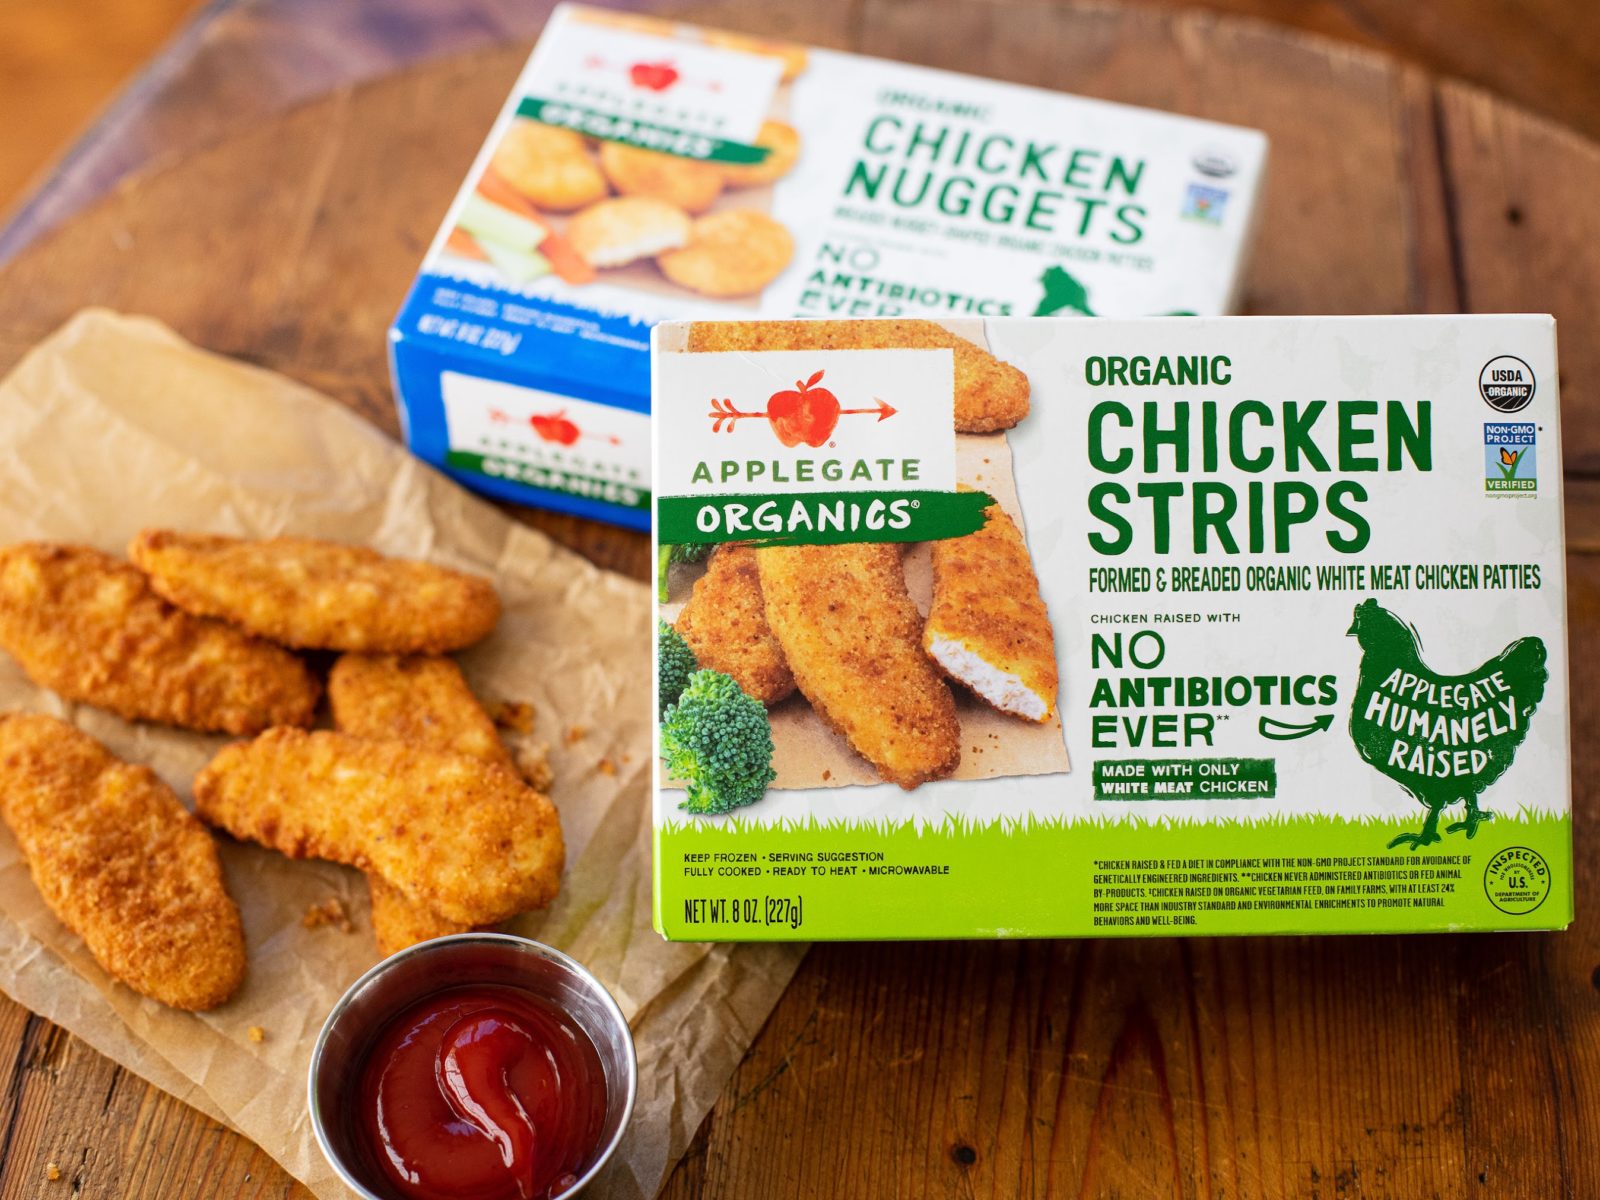 Get Applegate Organic Chicken Nuggets Or Strips Just $5.46 At Publix (Regular Price $9.69)